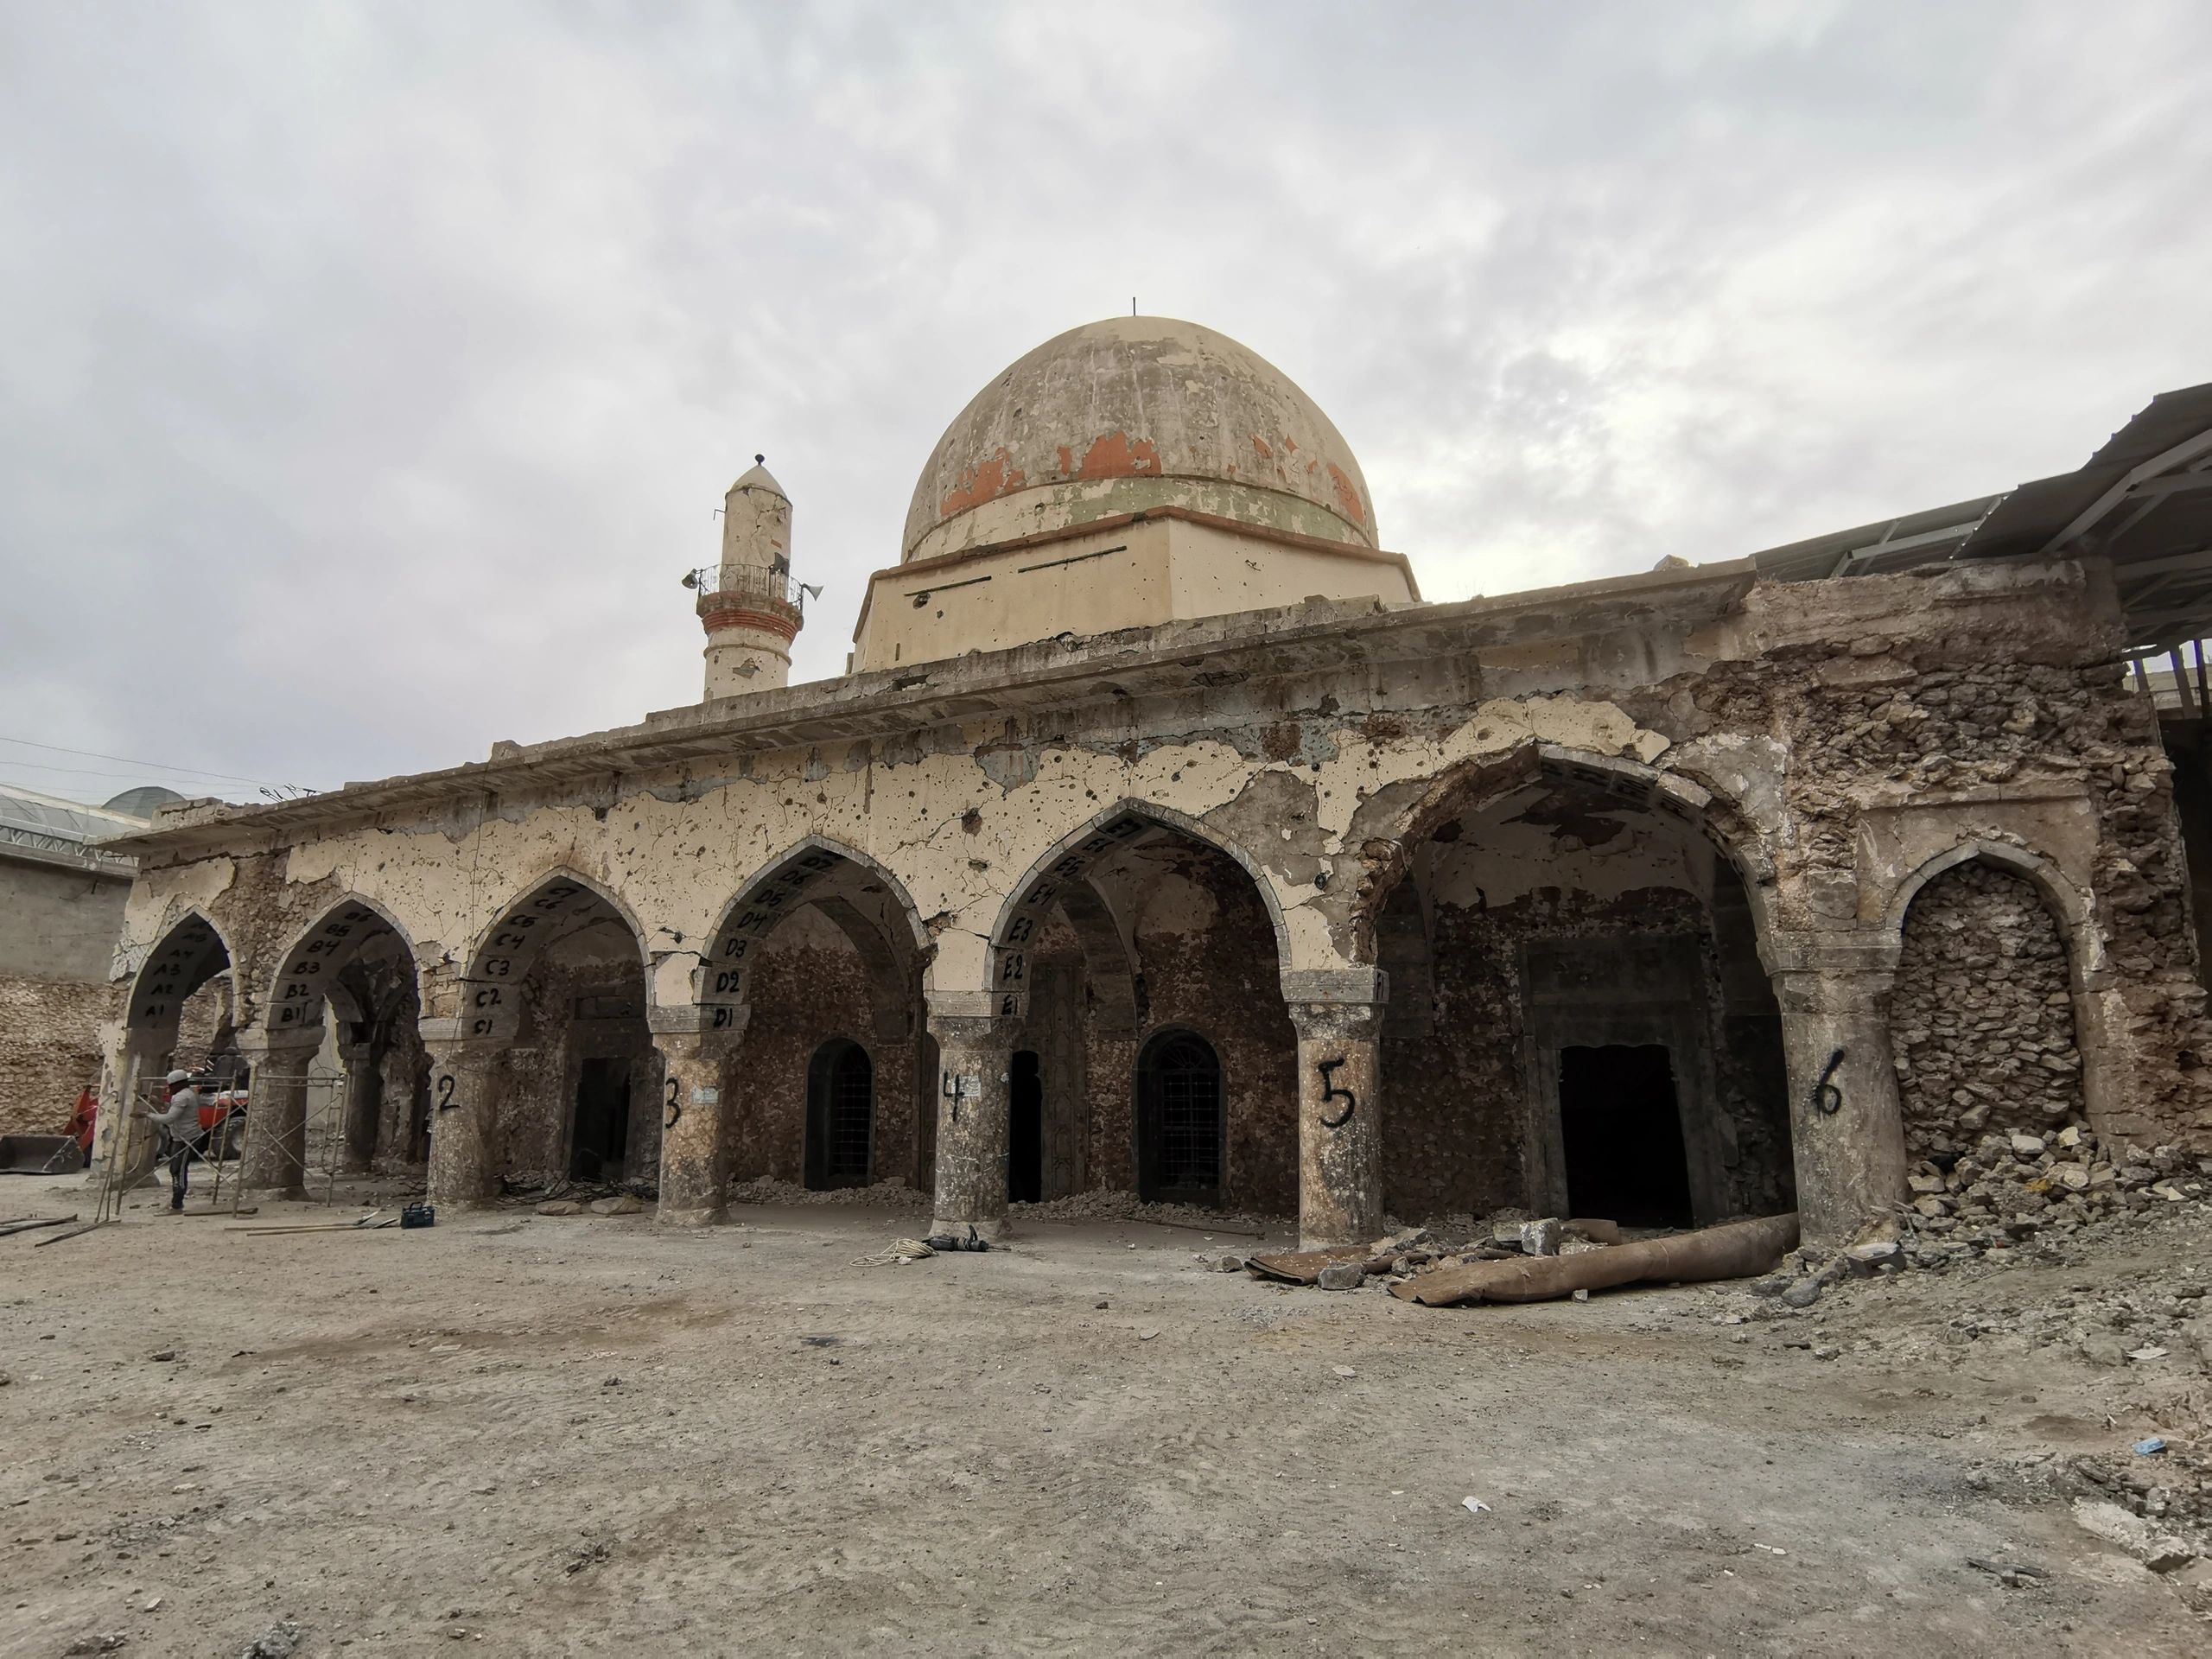 Al-Abdaly Mosque: hertiage mosque damaged in 2017 during ISIS war